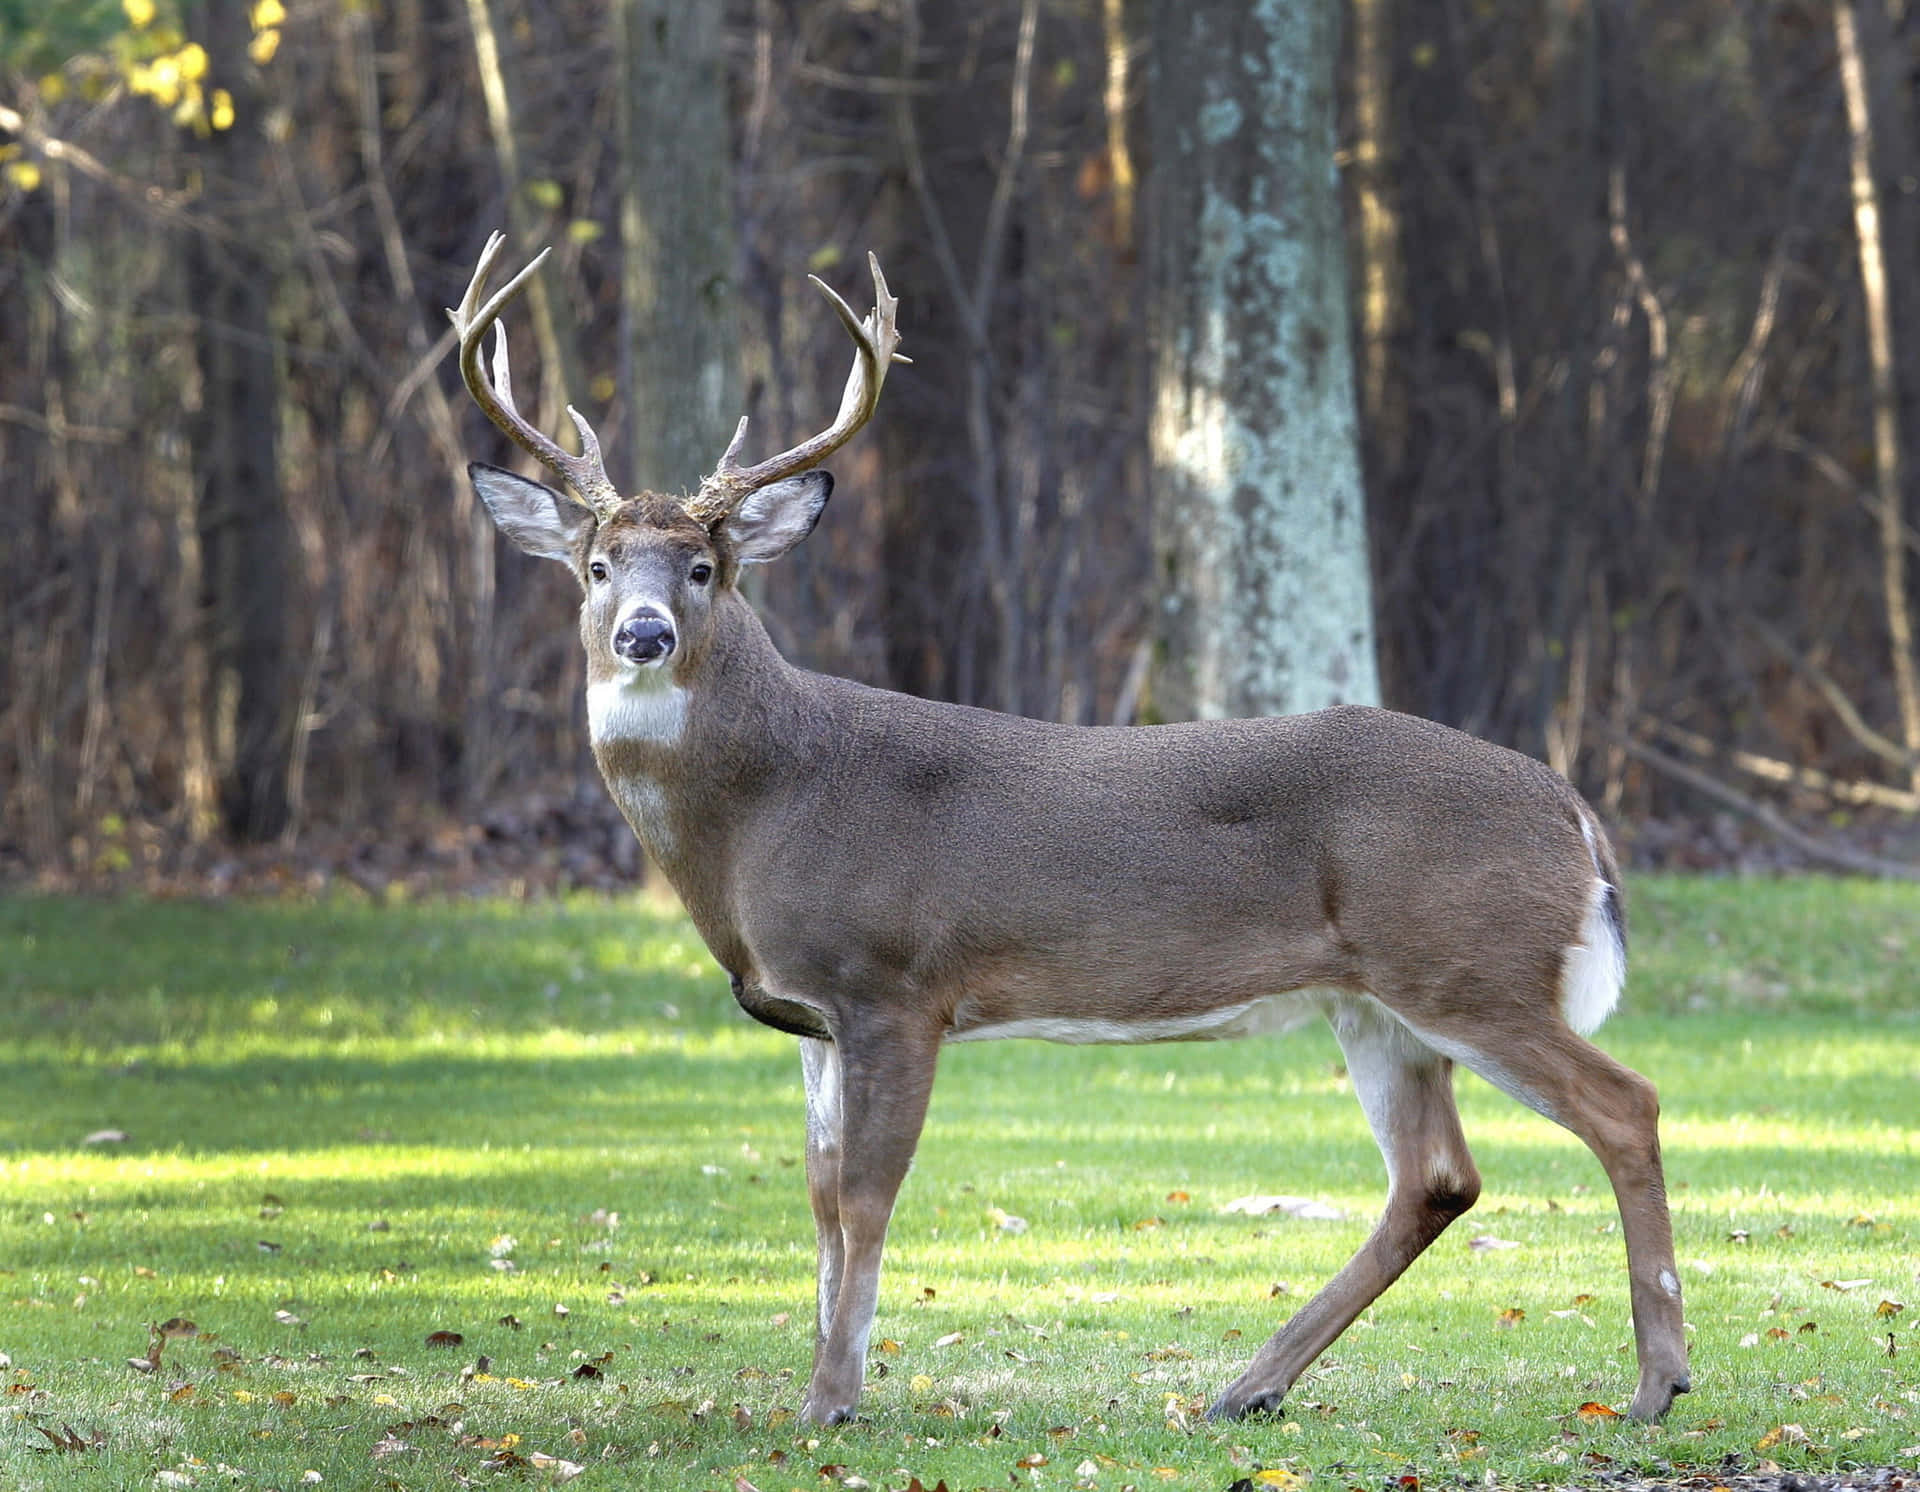 Majestic whitetail deer standing in a forest meadow Wallpaper